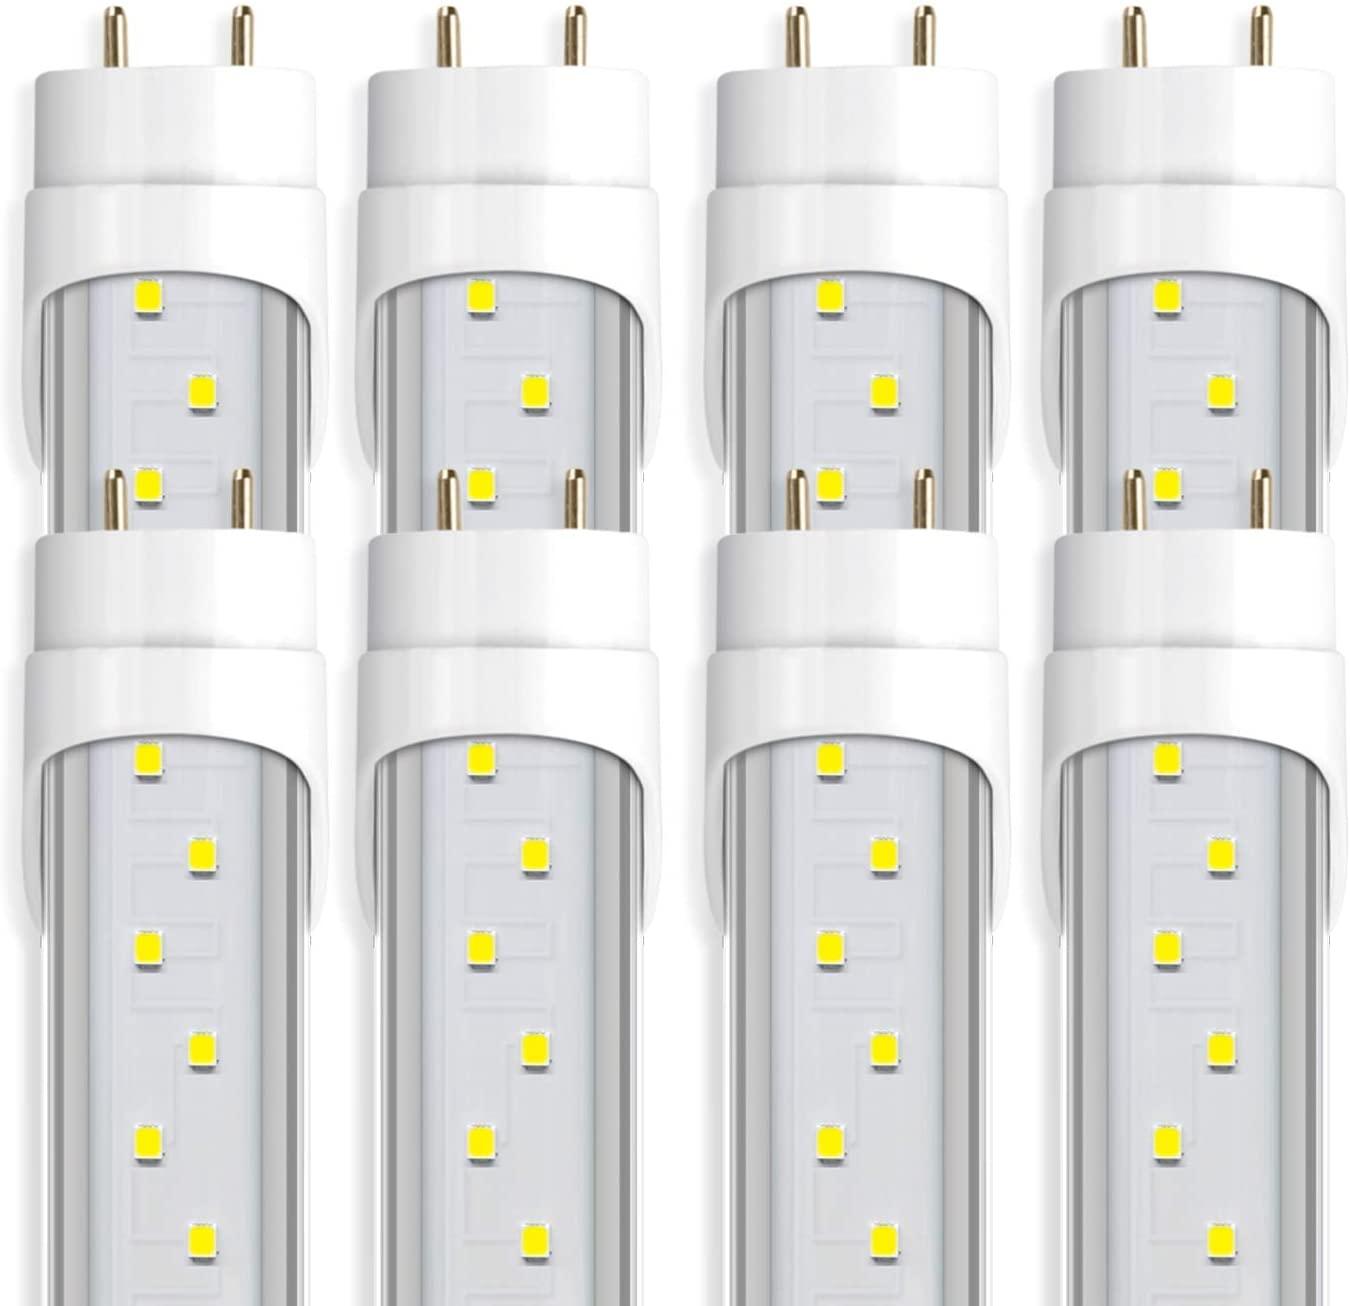 Barrina T8 T10 T12 LED Light Tube 4FT 24W 6000K 3200lm Dual-End Powered Clear Cover Fluorescent Light Bulbs Replacement ETL Listed 8-Pack - Barrina led